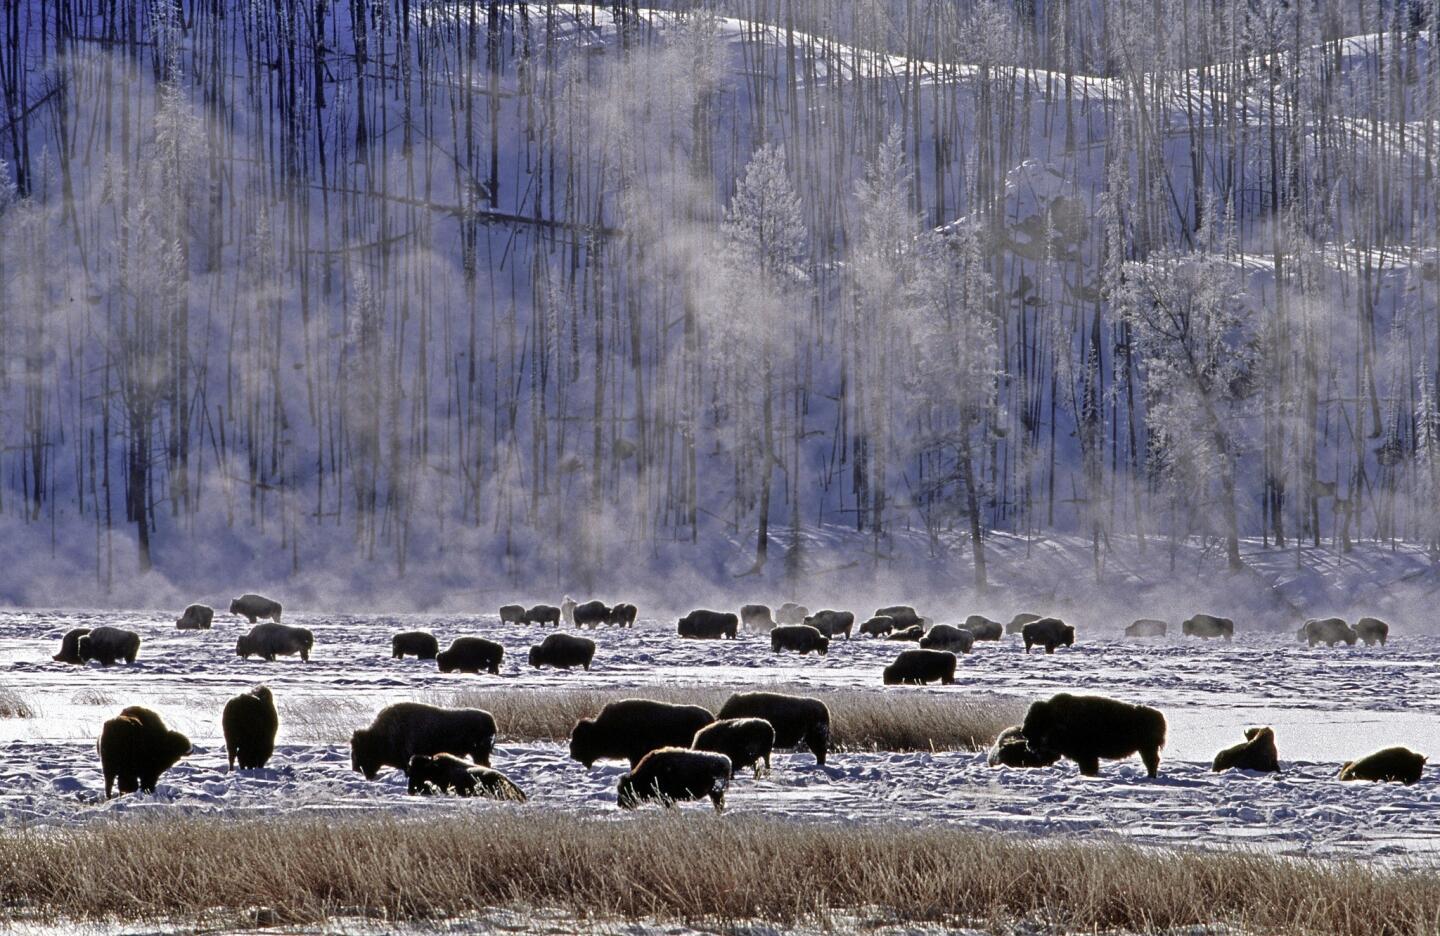 Bison at Yellowstone National Park.